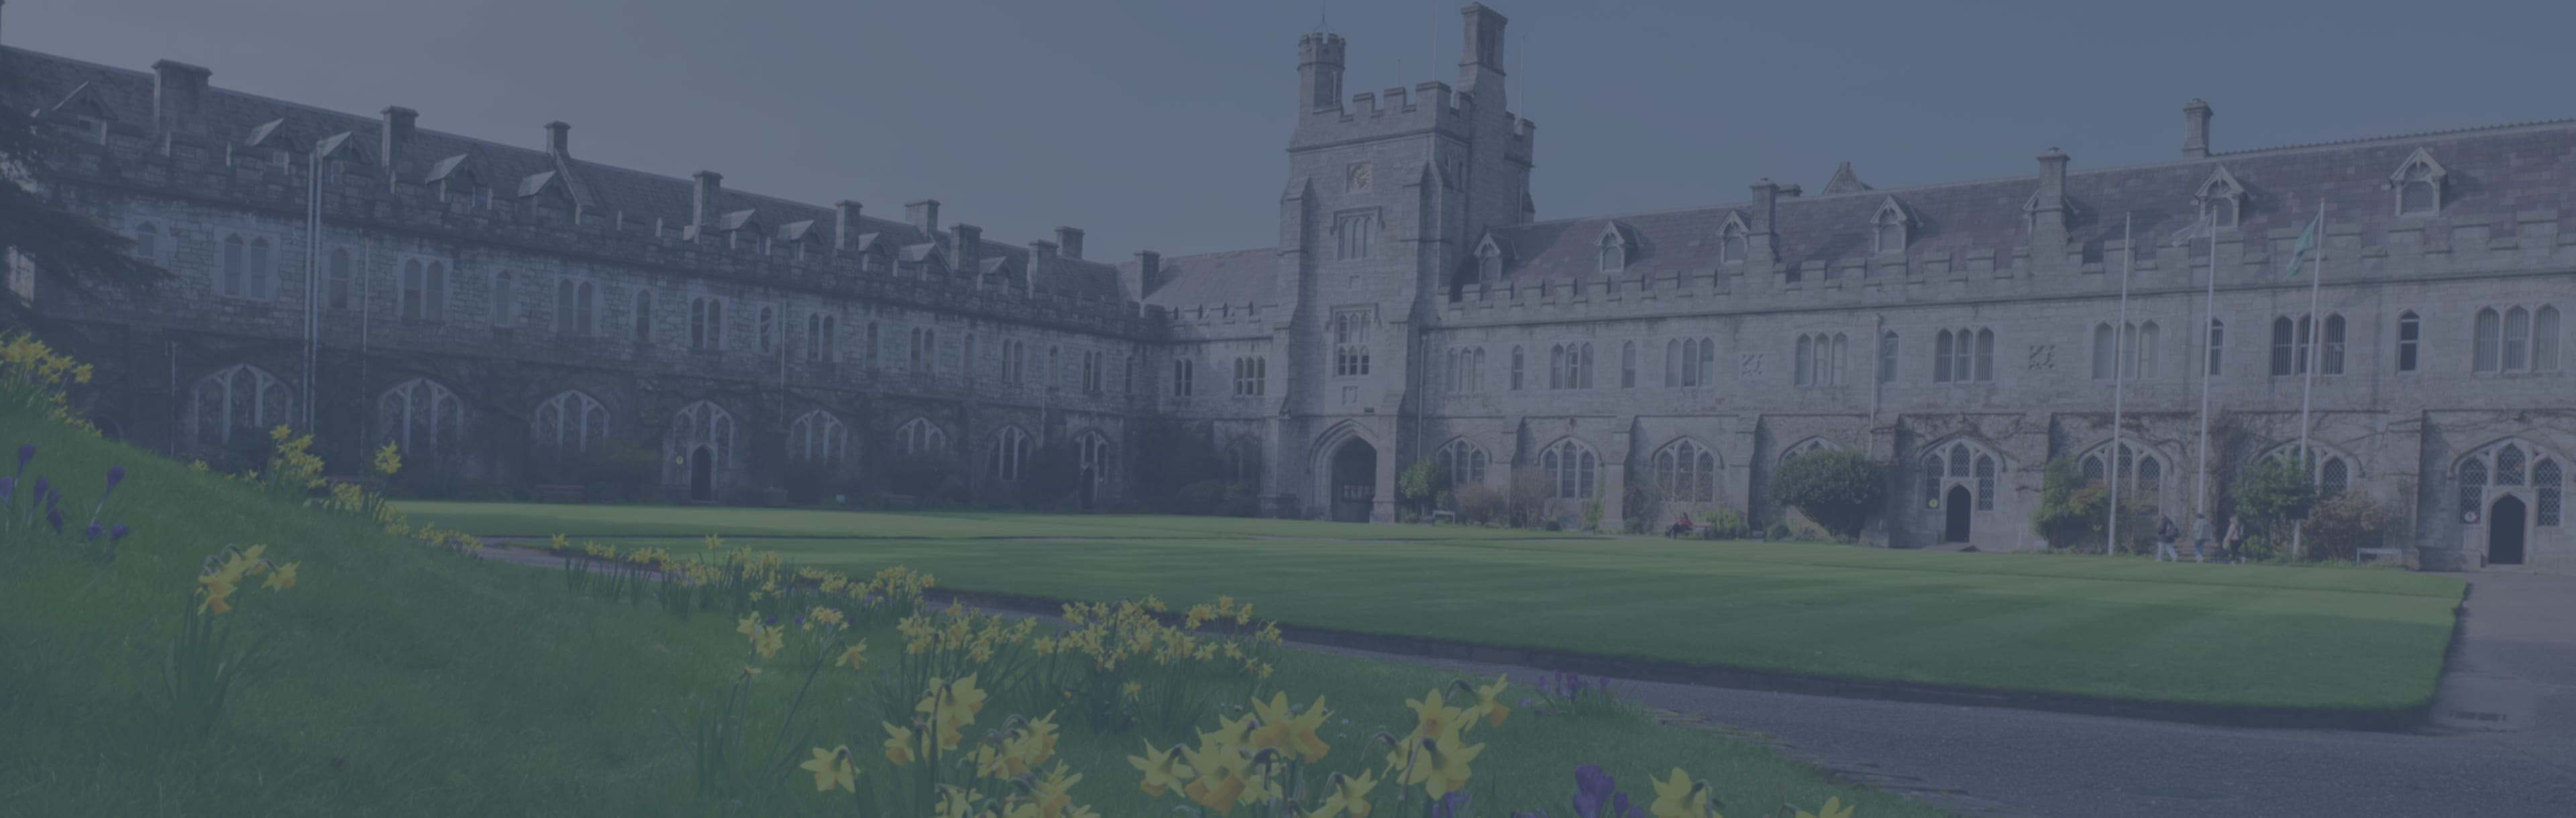 University College Cork LLM in Law - Marine and Maritime Law